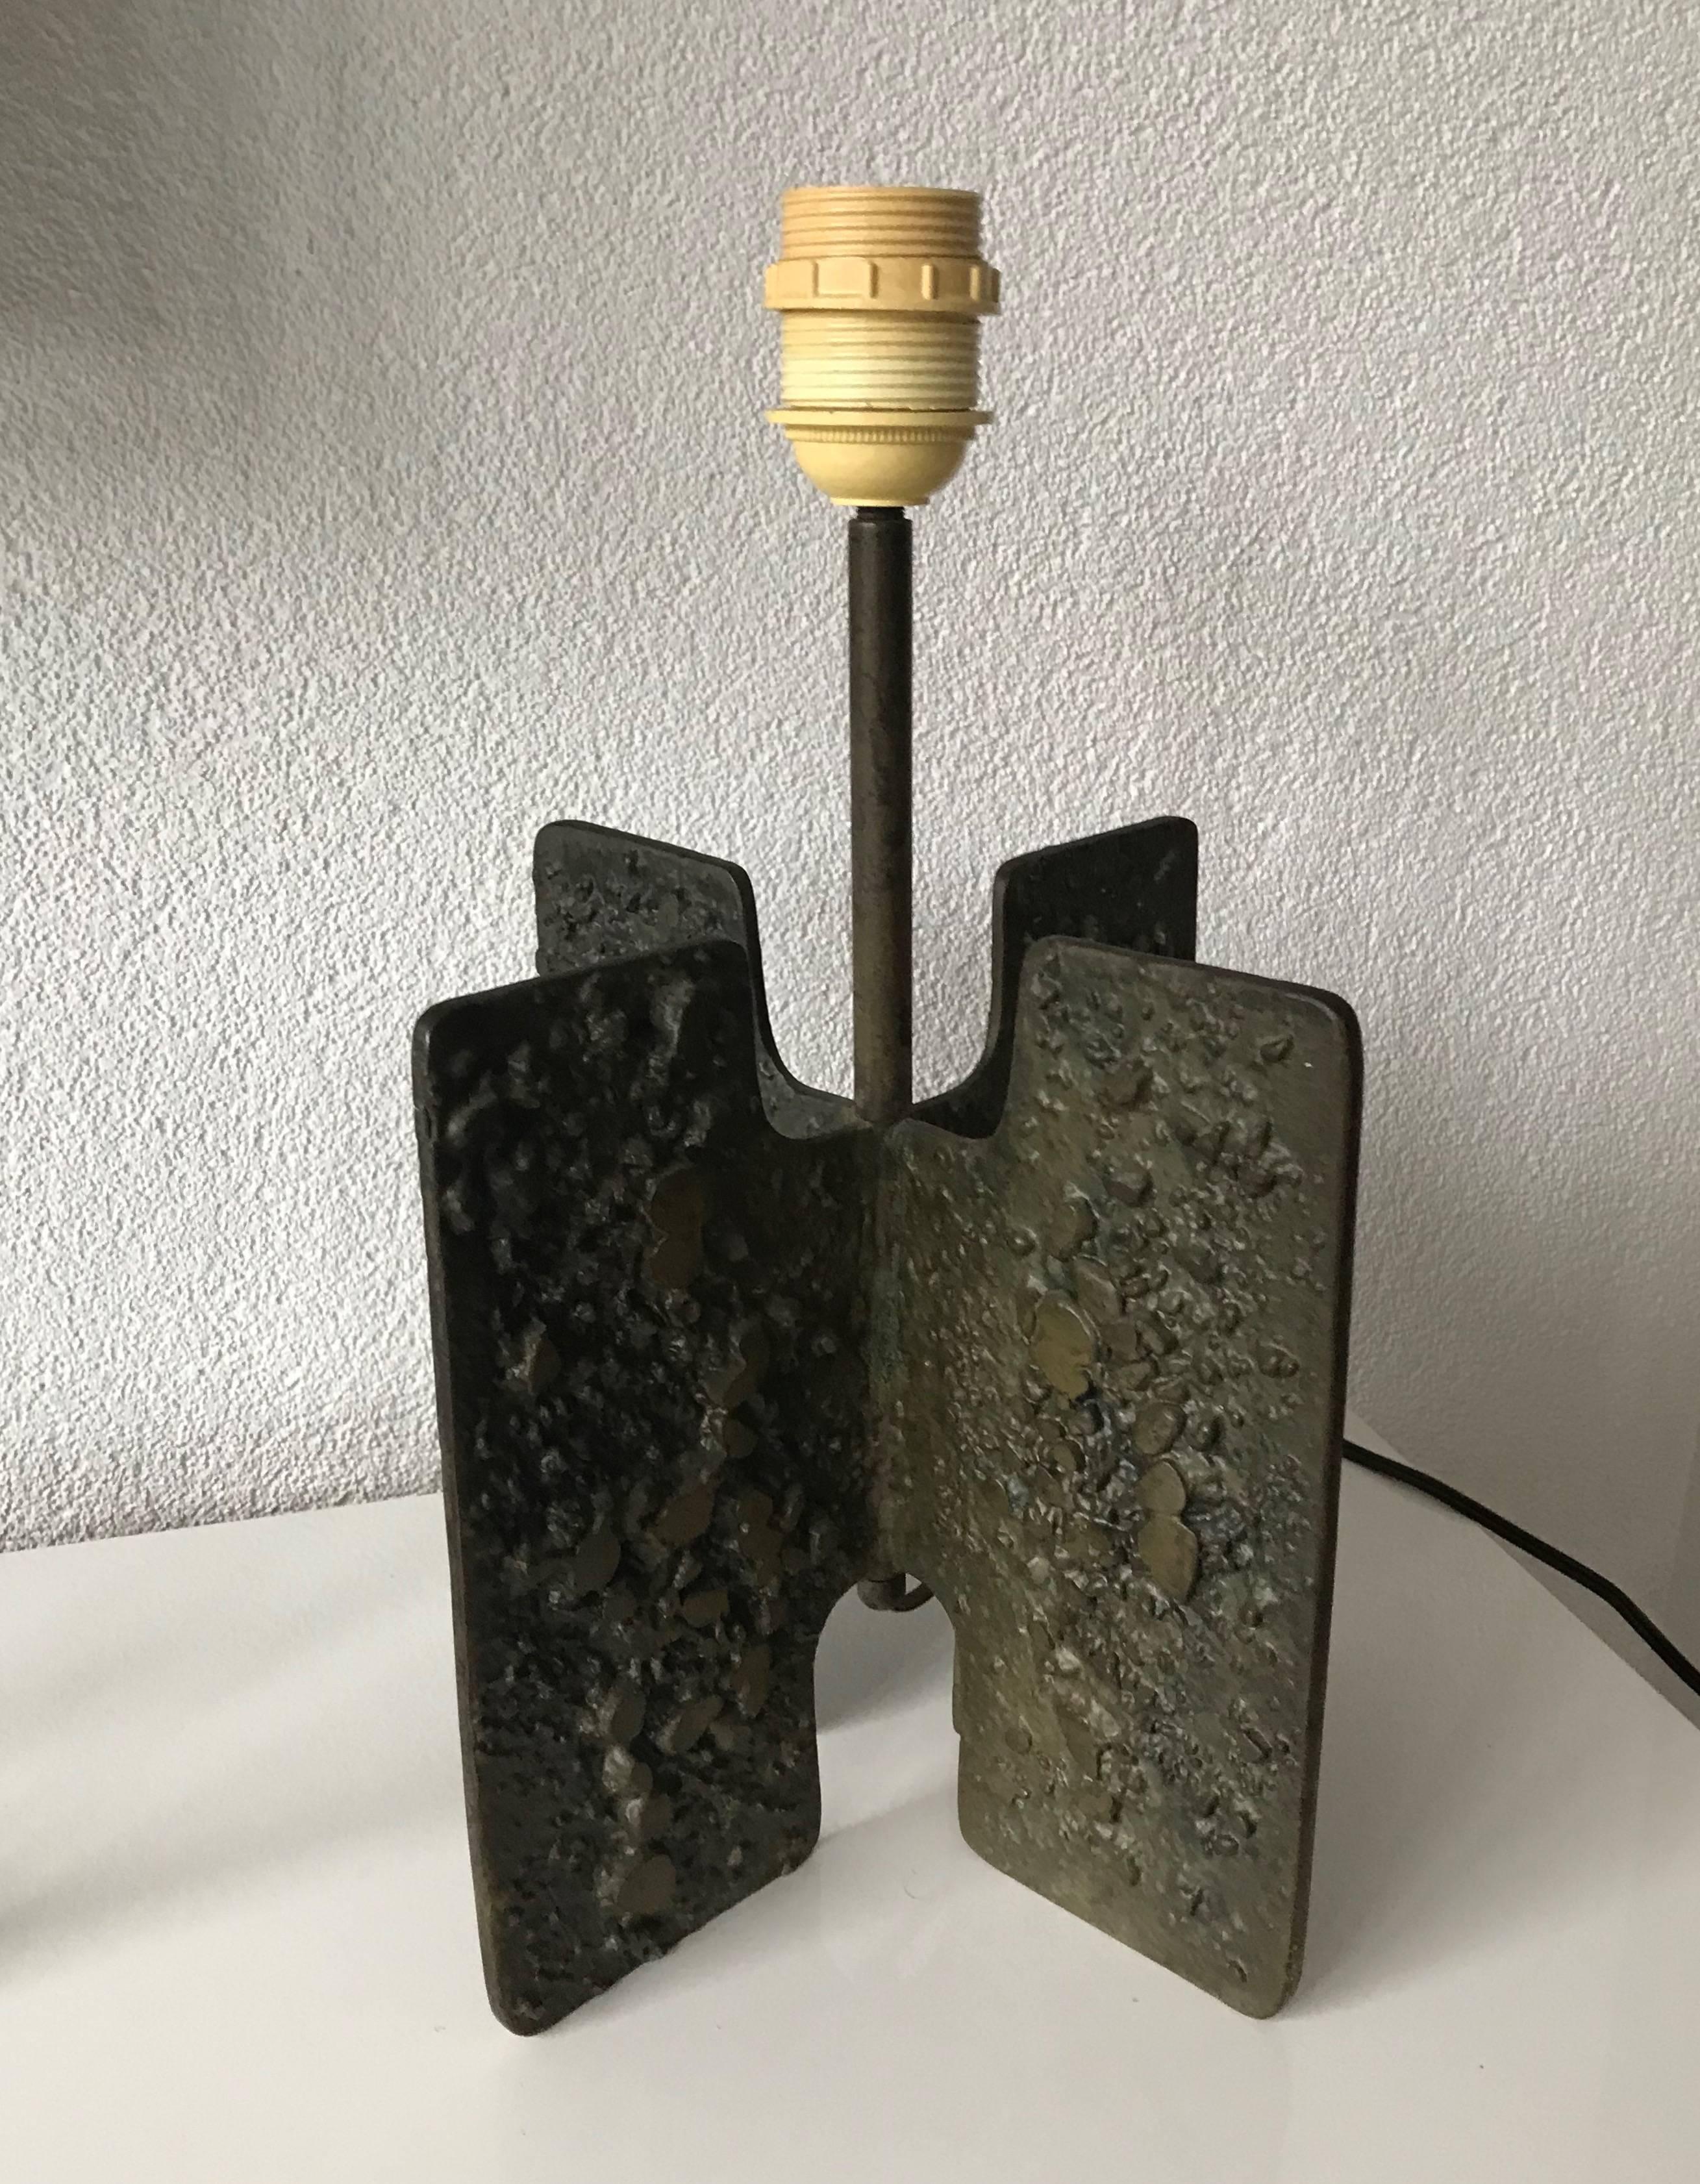 Unique and decorative work of midcentury lighting art.

Unfortunately we don't know the artist who created this table lamp. So in order to find out about the deeper meaning of this work of lighting art we will have to try and analyze the piece